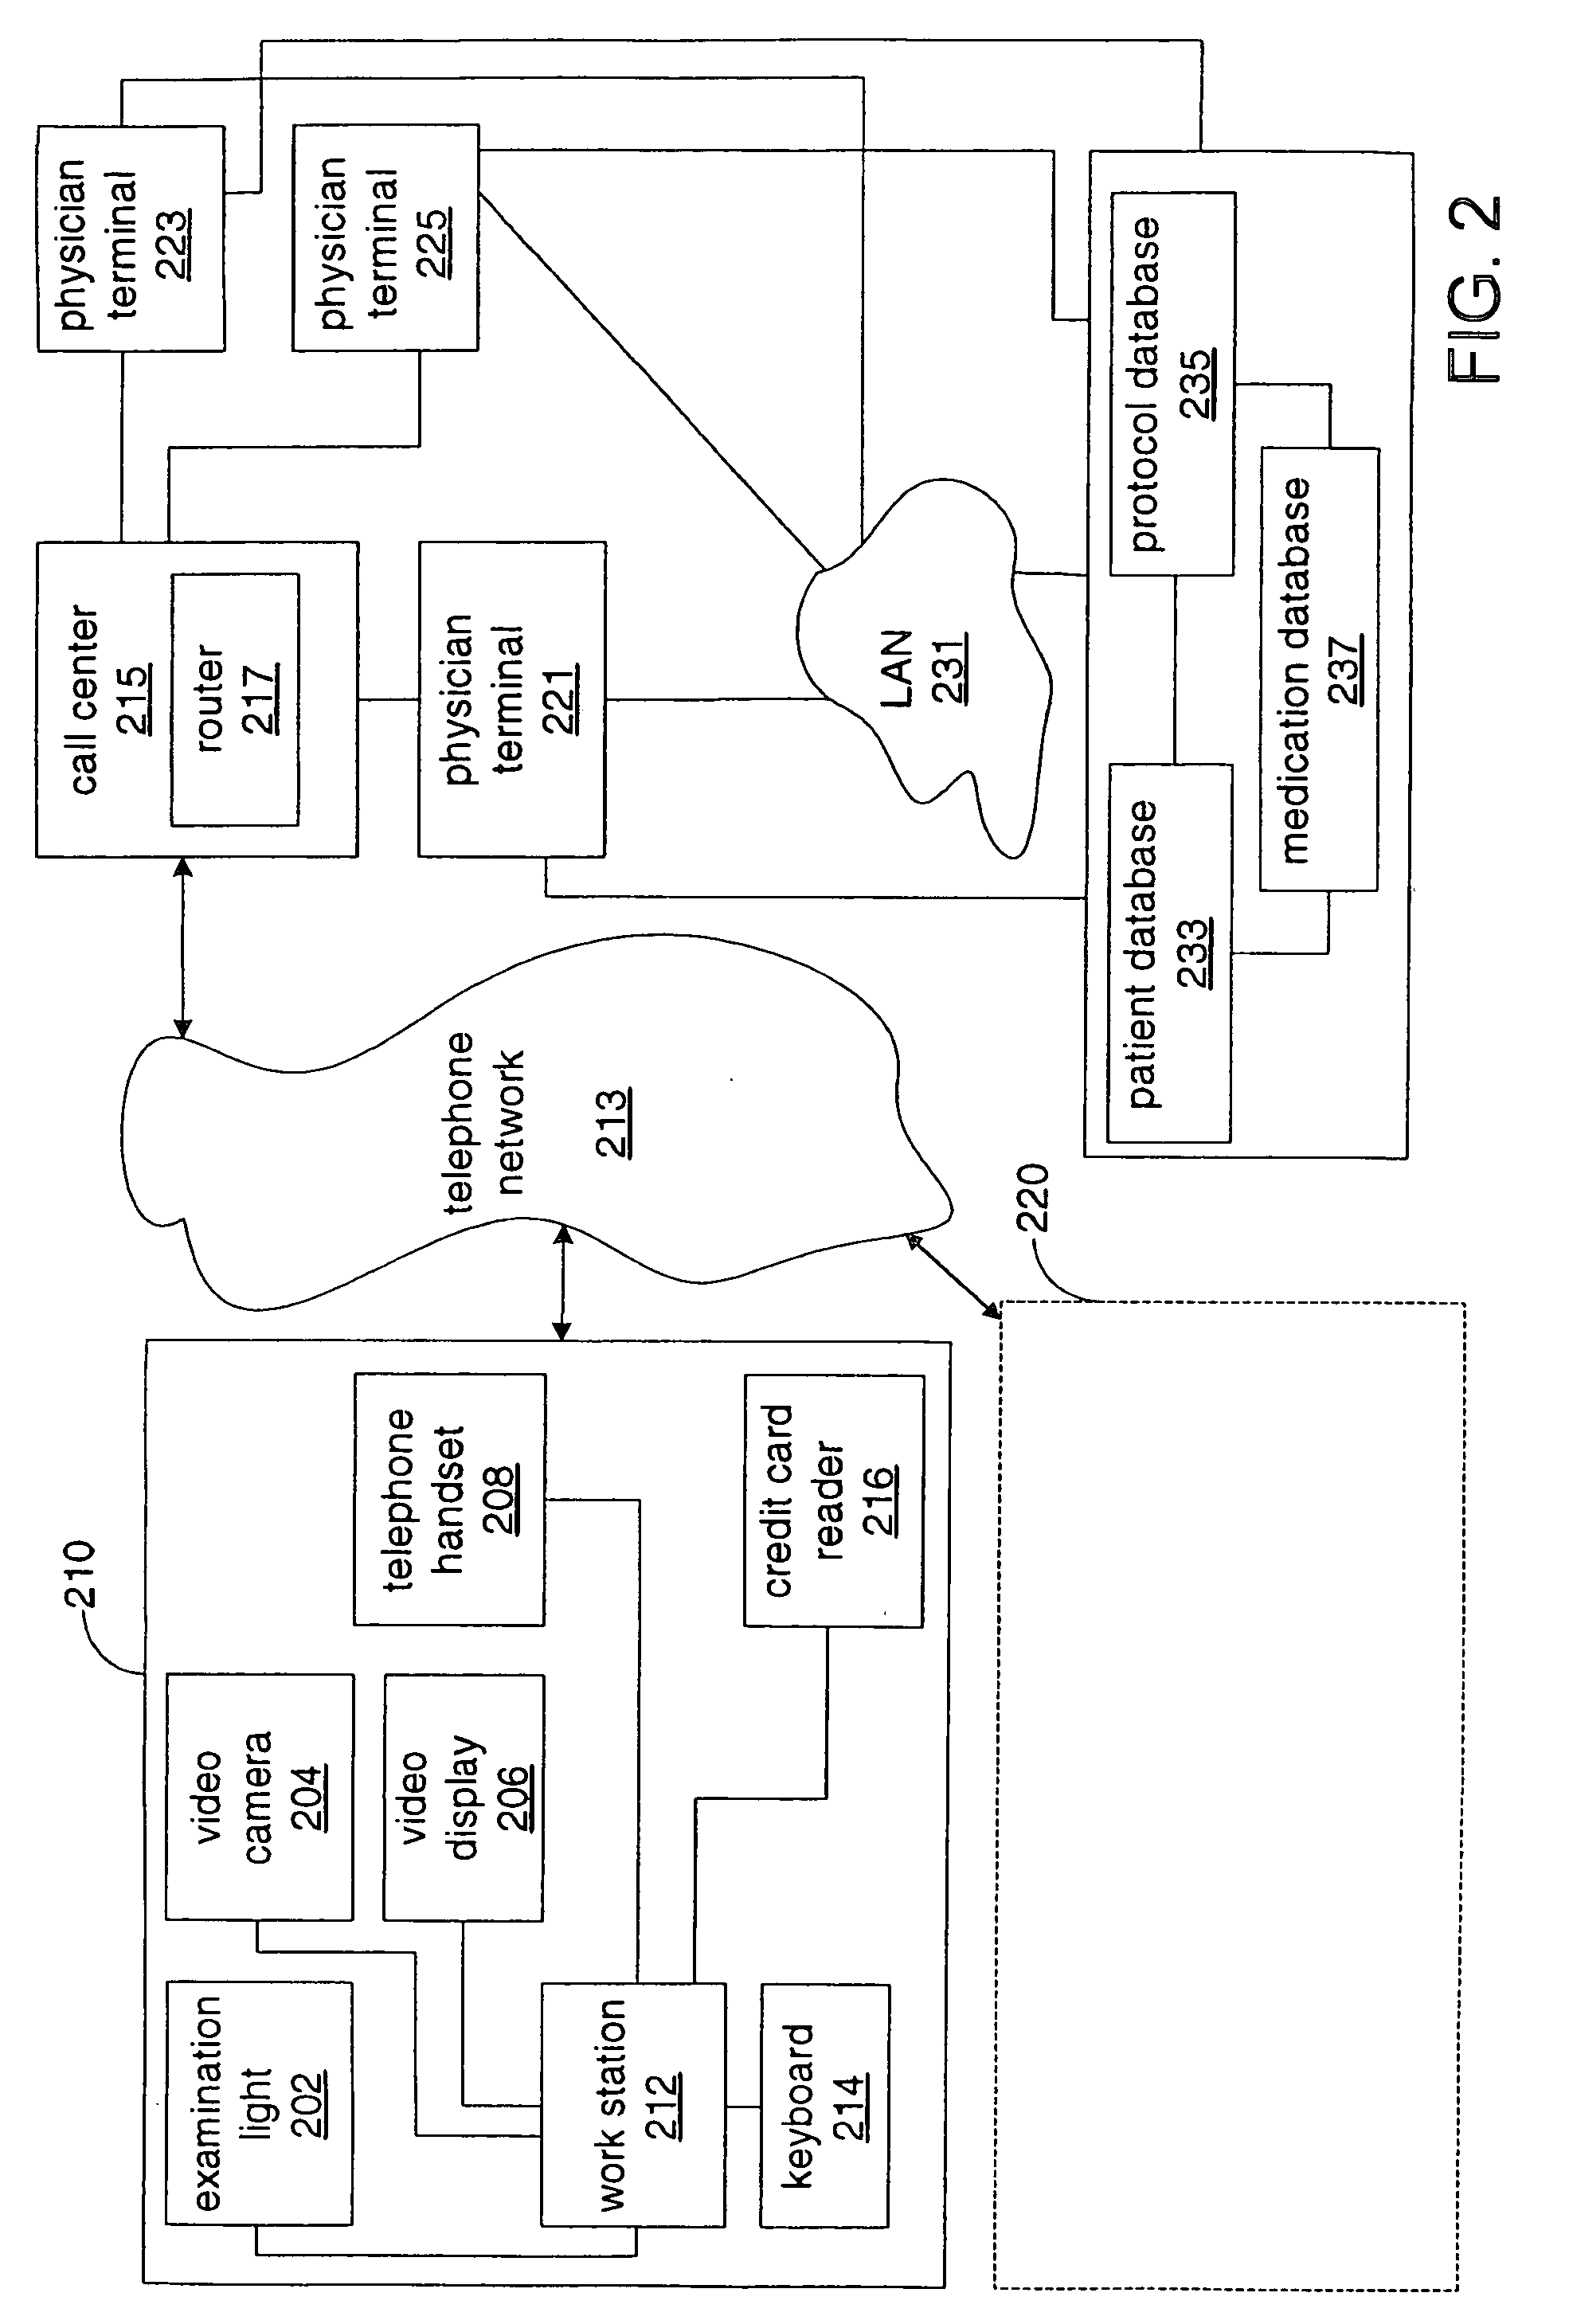 System and method for delivering medical examination, treatment and assistance over a network